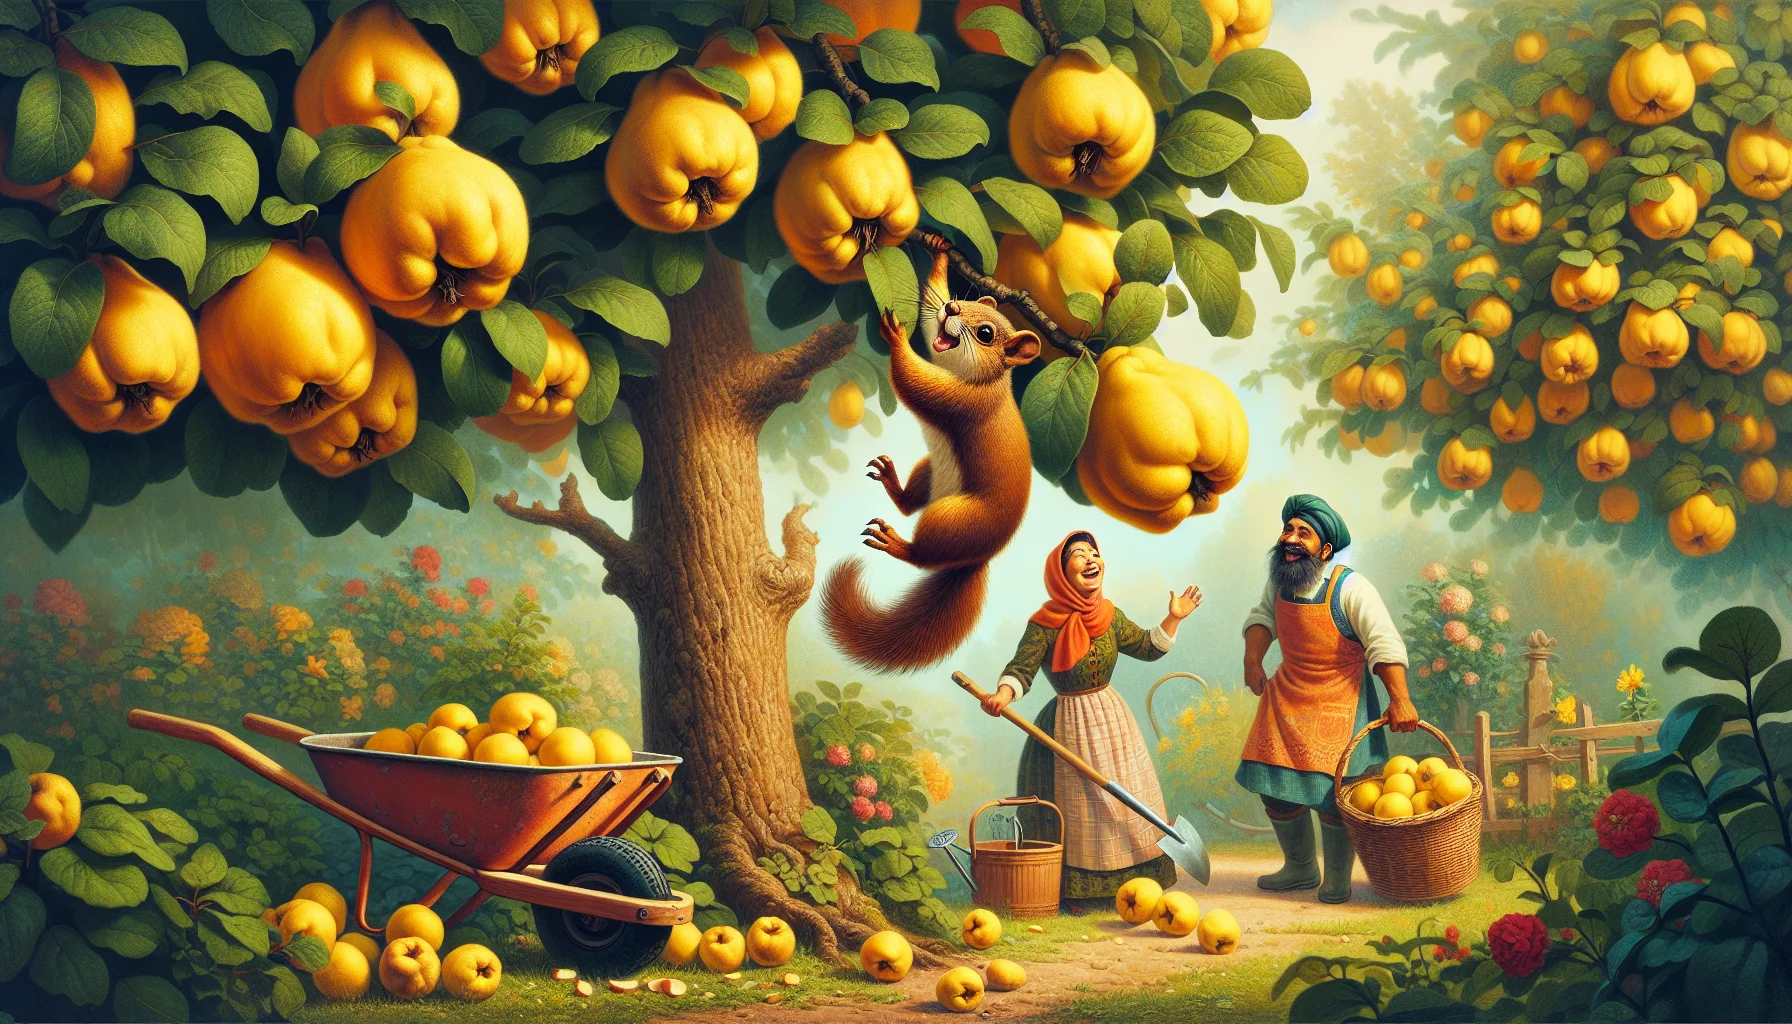 Delight in a whimsical scene capturing the joy of quince season. Envision a lush garden abundant with ripe, golden quince fruits hanging heavily from the trees. A mischievous squirrel, brown and fluffy, is trying its best to clamber up one tree but keeps sliding down due to the weight of a huge quince it's holding in its paws. Nearby, a South Asian man and a Hispanic woman, both dressed in typical gardening clothes, are watching this spectacle and can't help but laugh heartily, their faces lit up with amusement. Their wheelbarrow, spade, and watering can signal their love for gardening. This scene perfectly captures the humor and magic wrapped in nature's gifts and the joy of gardening.